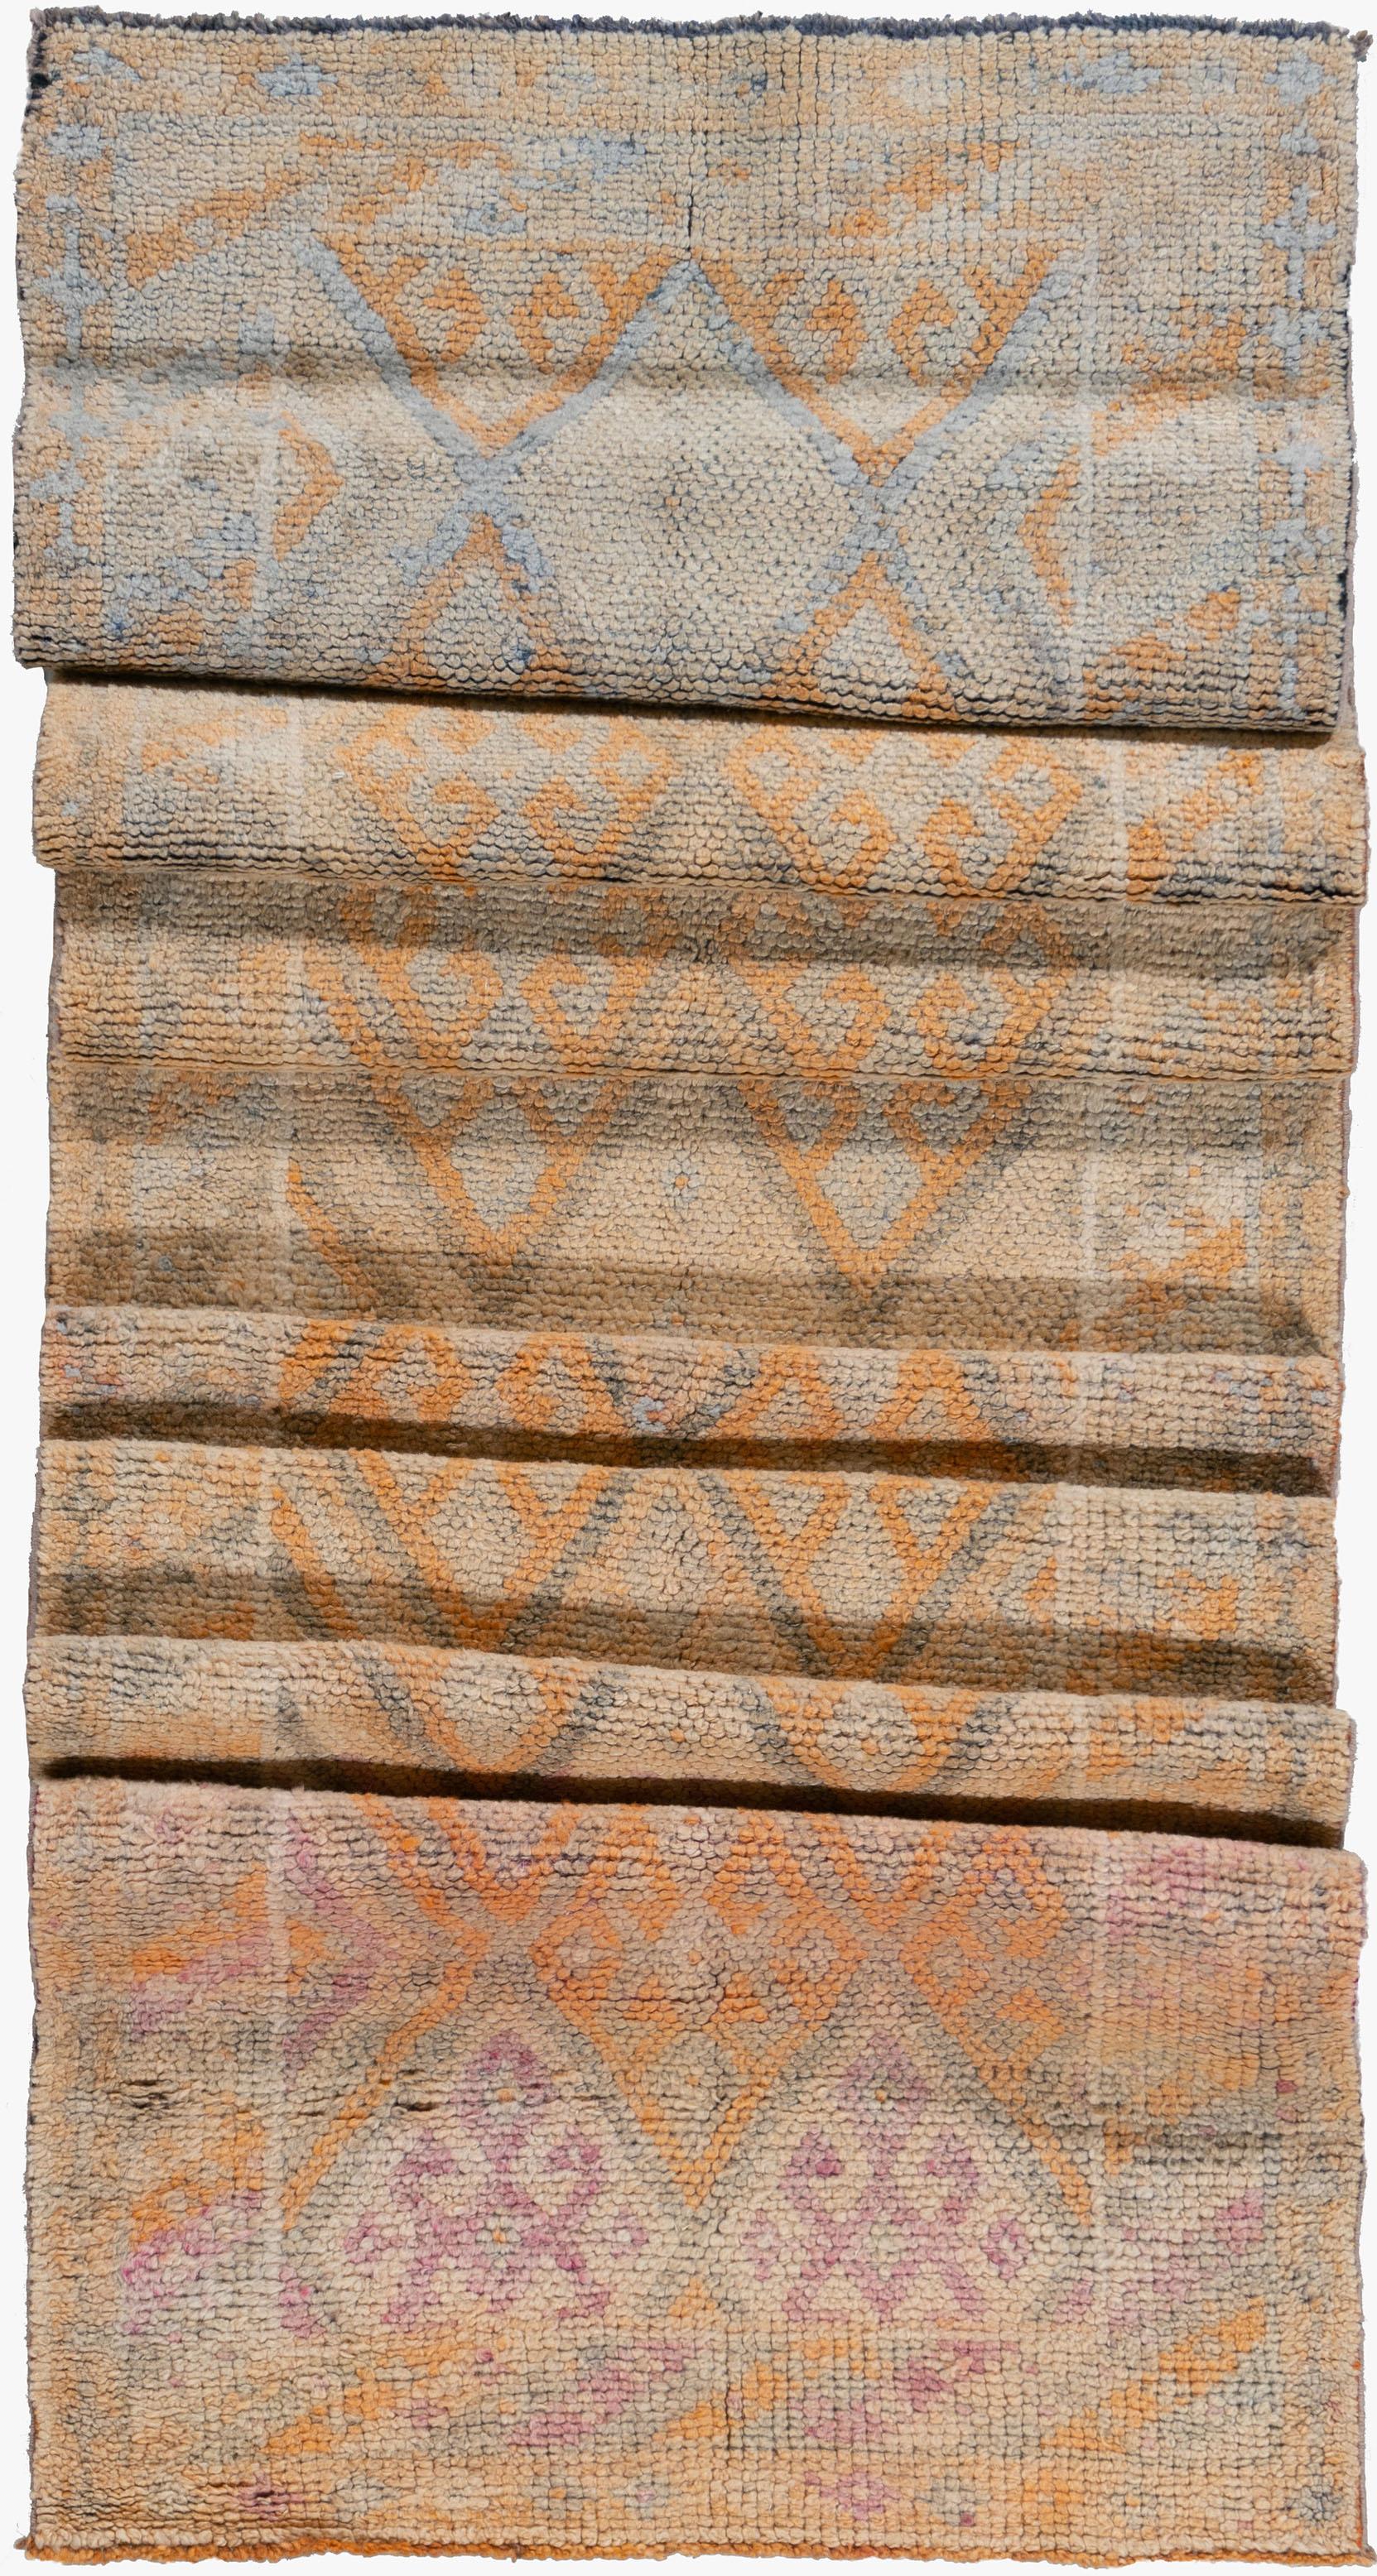 Vintage Turkish Oushak Runner 2'9 x 14'. Hand-woven in Turkey where rug weaving is the culture rather than a business. Rugs from Turkey are known for the high quality of their wool their beautiful patterns and warm colors. These designer favorites